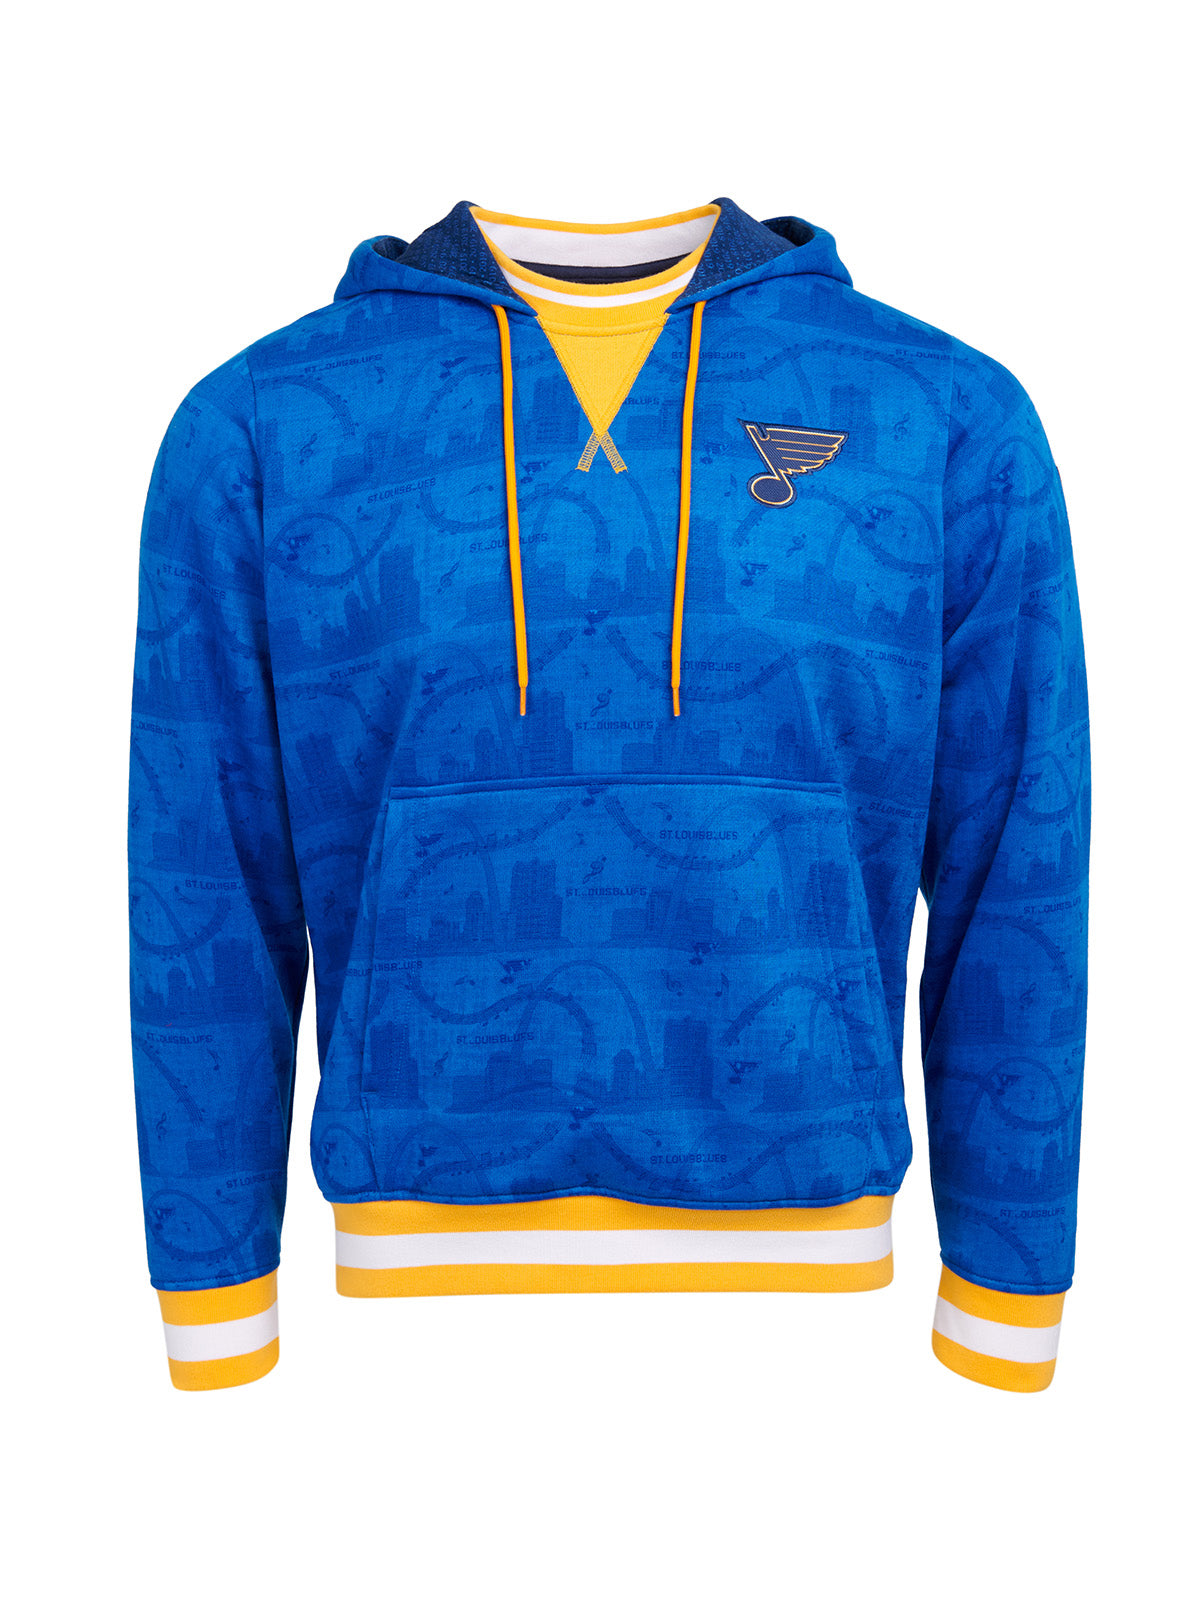 St. Louis Blues Hoodie - Show your team spirit, with the iconic team logo patch on the front left chest, and proudly display your St. Louis Blues support in their team colors with this NHL hockey hoodie.